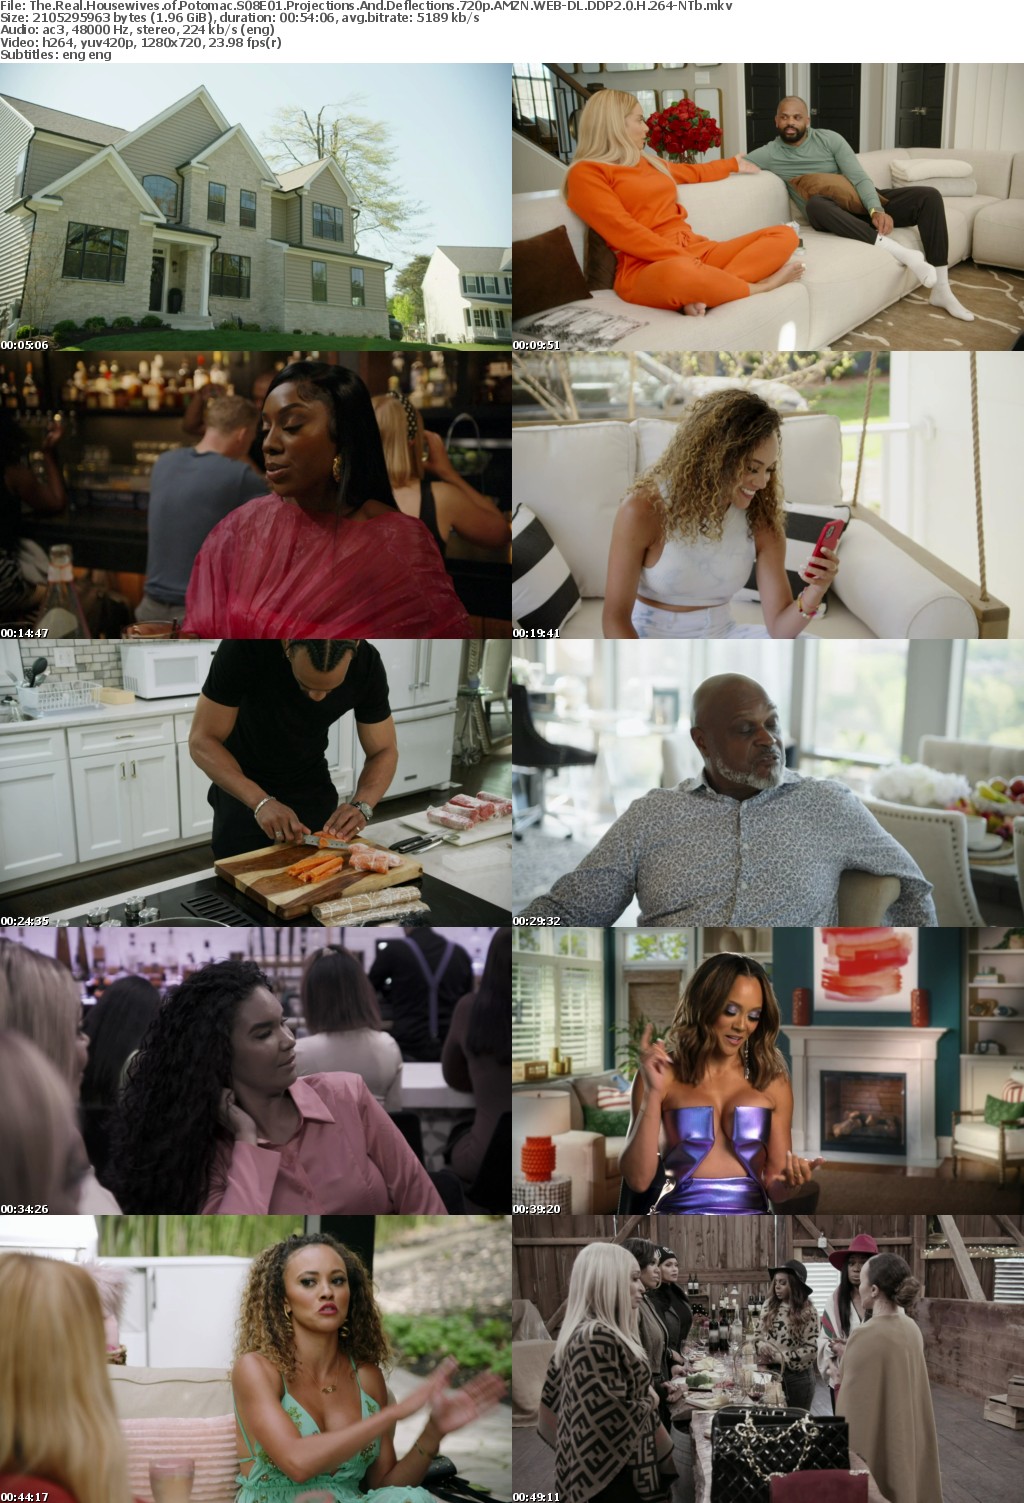 The Real Housewives of Potomac S08E01 Projections And Deflections 720p AMZN WEB-DL DDP2 0 H 264-NTb